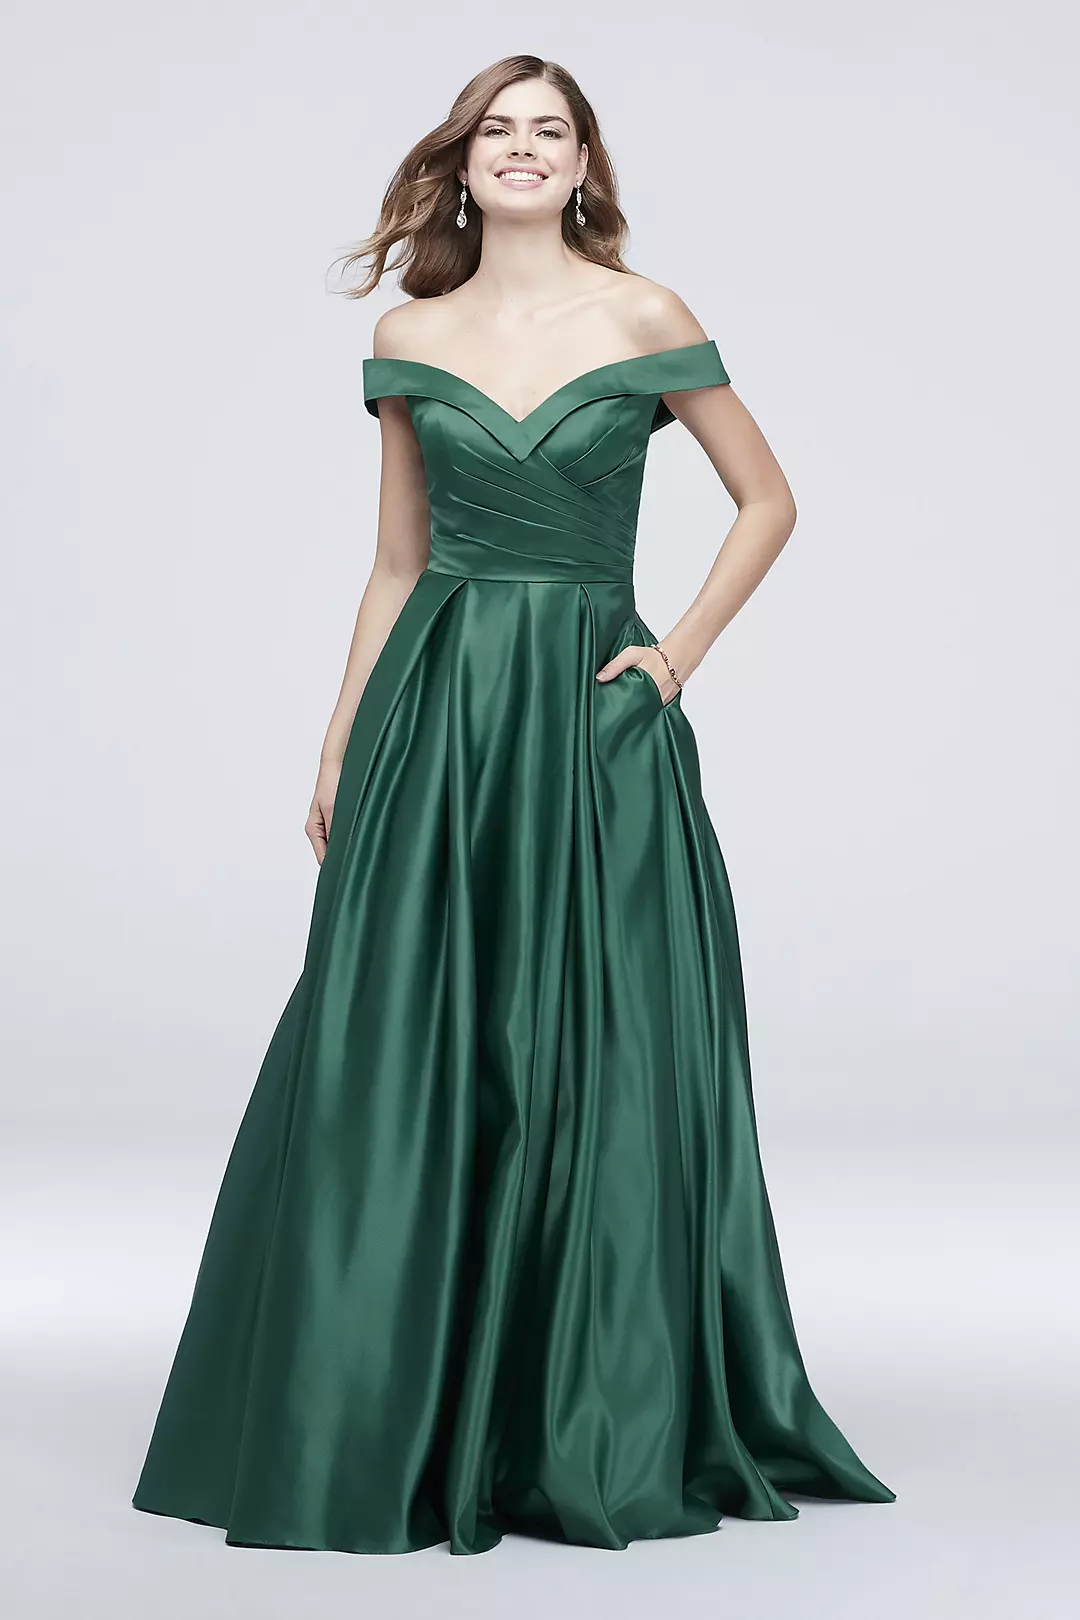 Pleated Off-the-Shoulder Lapel Ball Gown Image